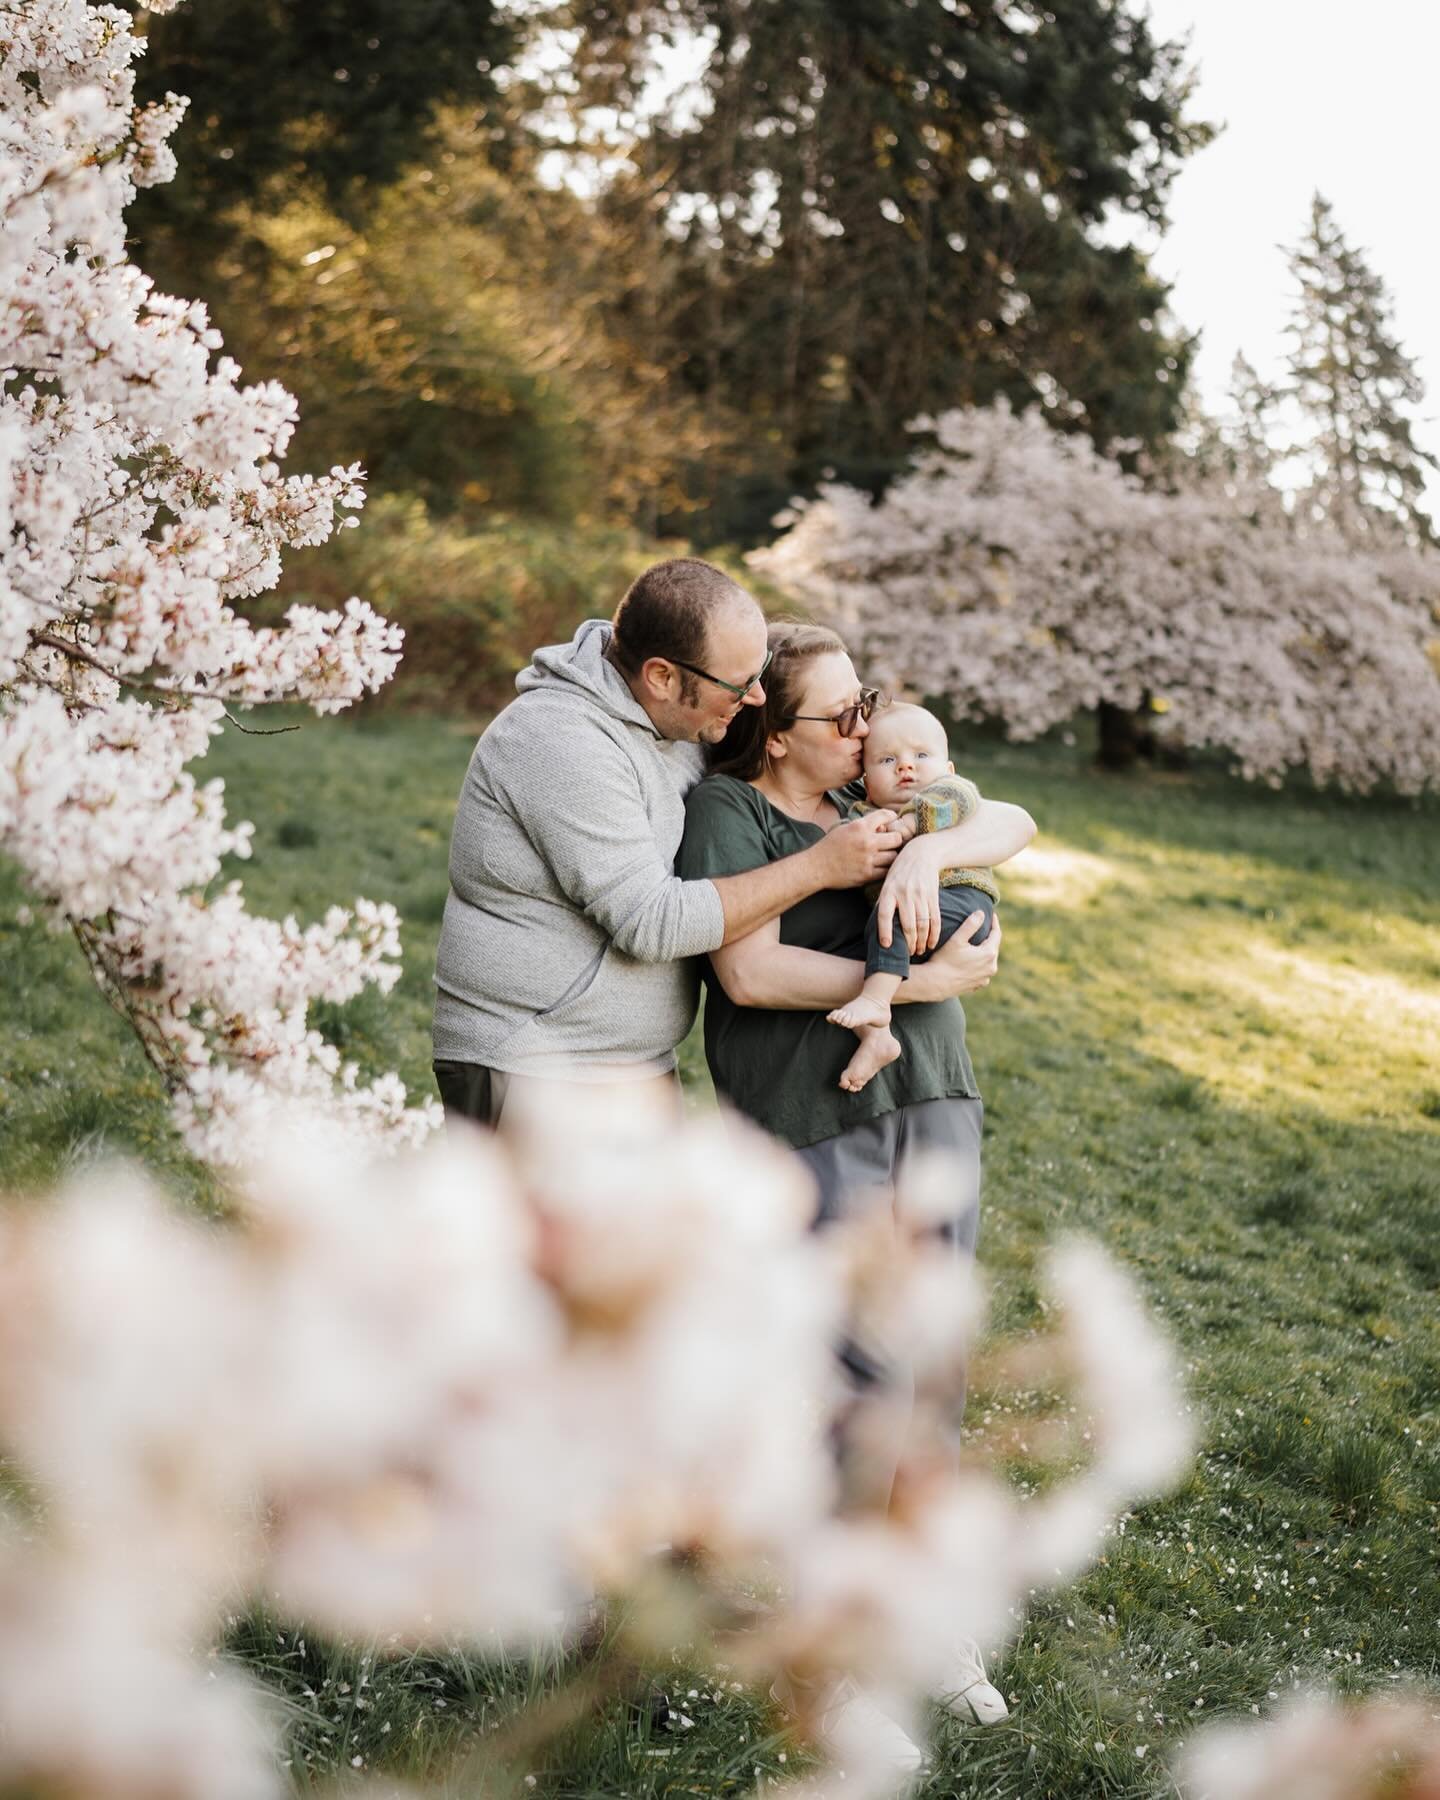 Every spring I am astounded at how gorgeous the world becomes as it blooms back into life. 

Flowering trees + loving families = my favorite photo setup. I&rsquo;m also really loving seeing the same families on repeat for their First Year Packages, a